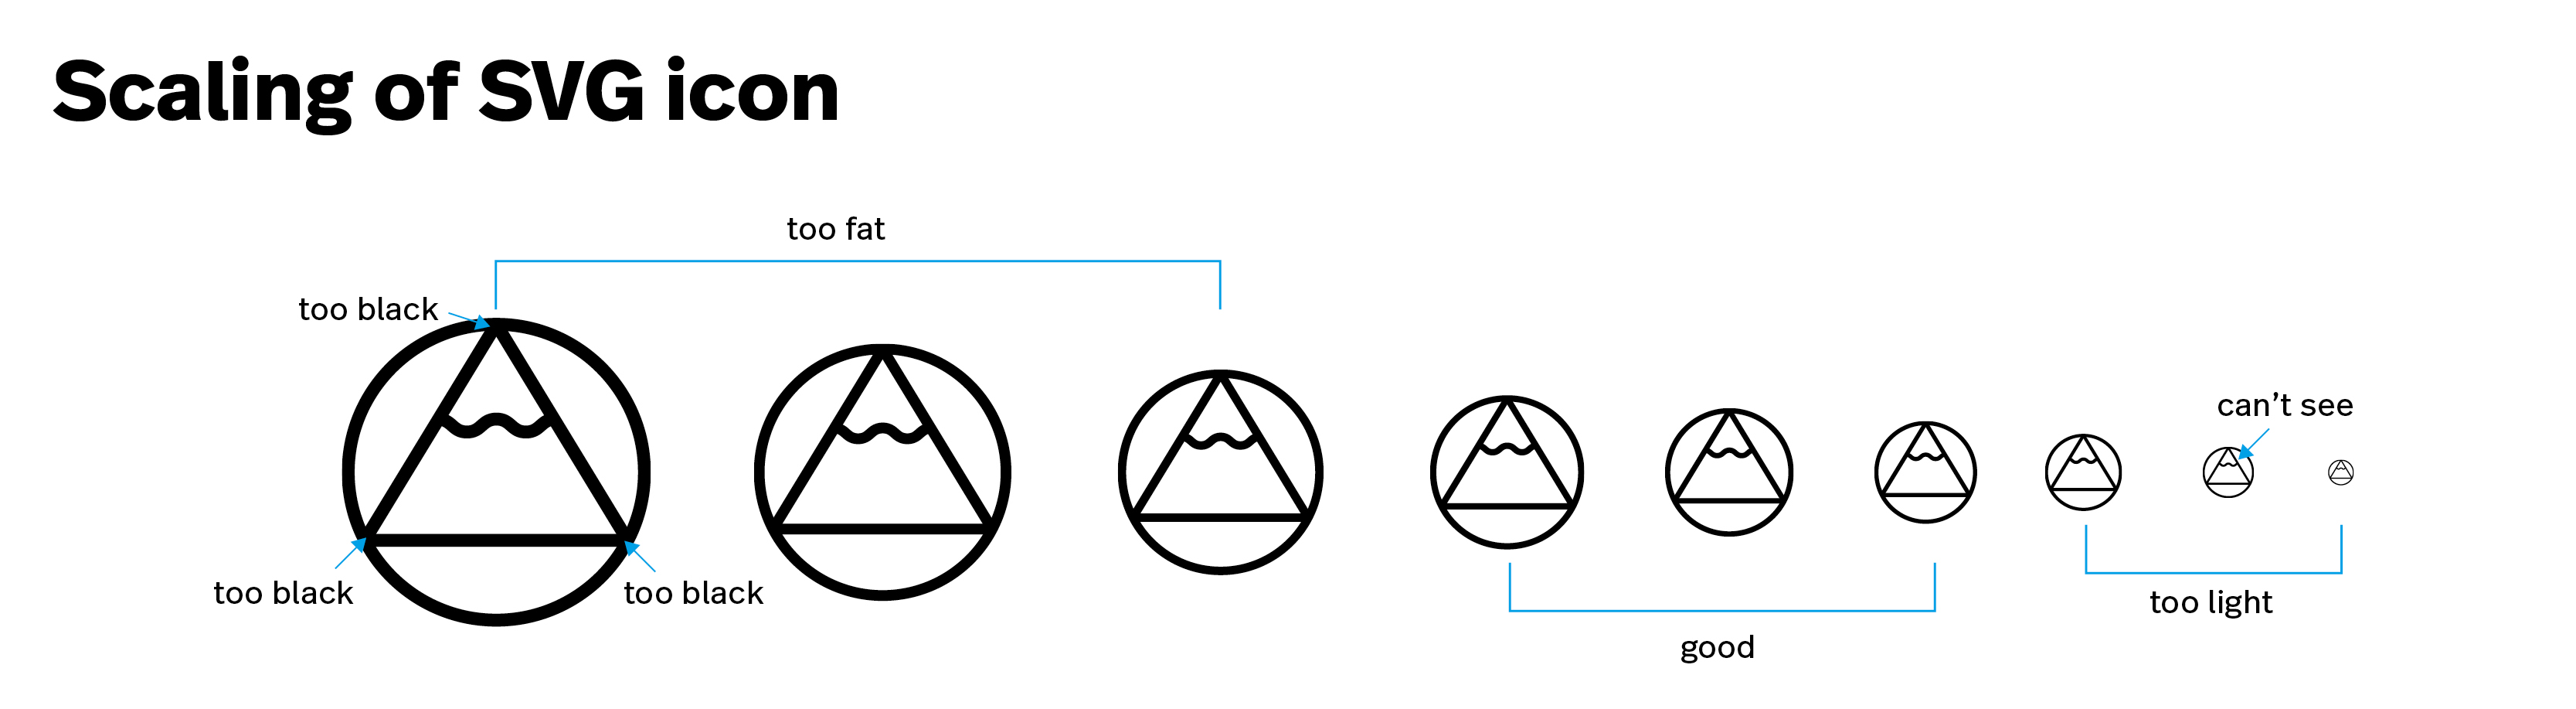 Pictograms SVG Icons Scaling